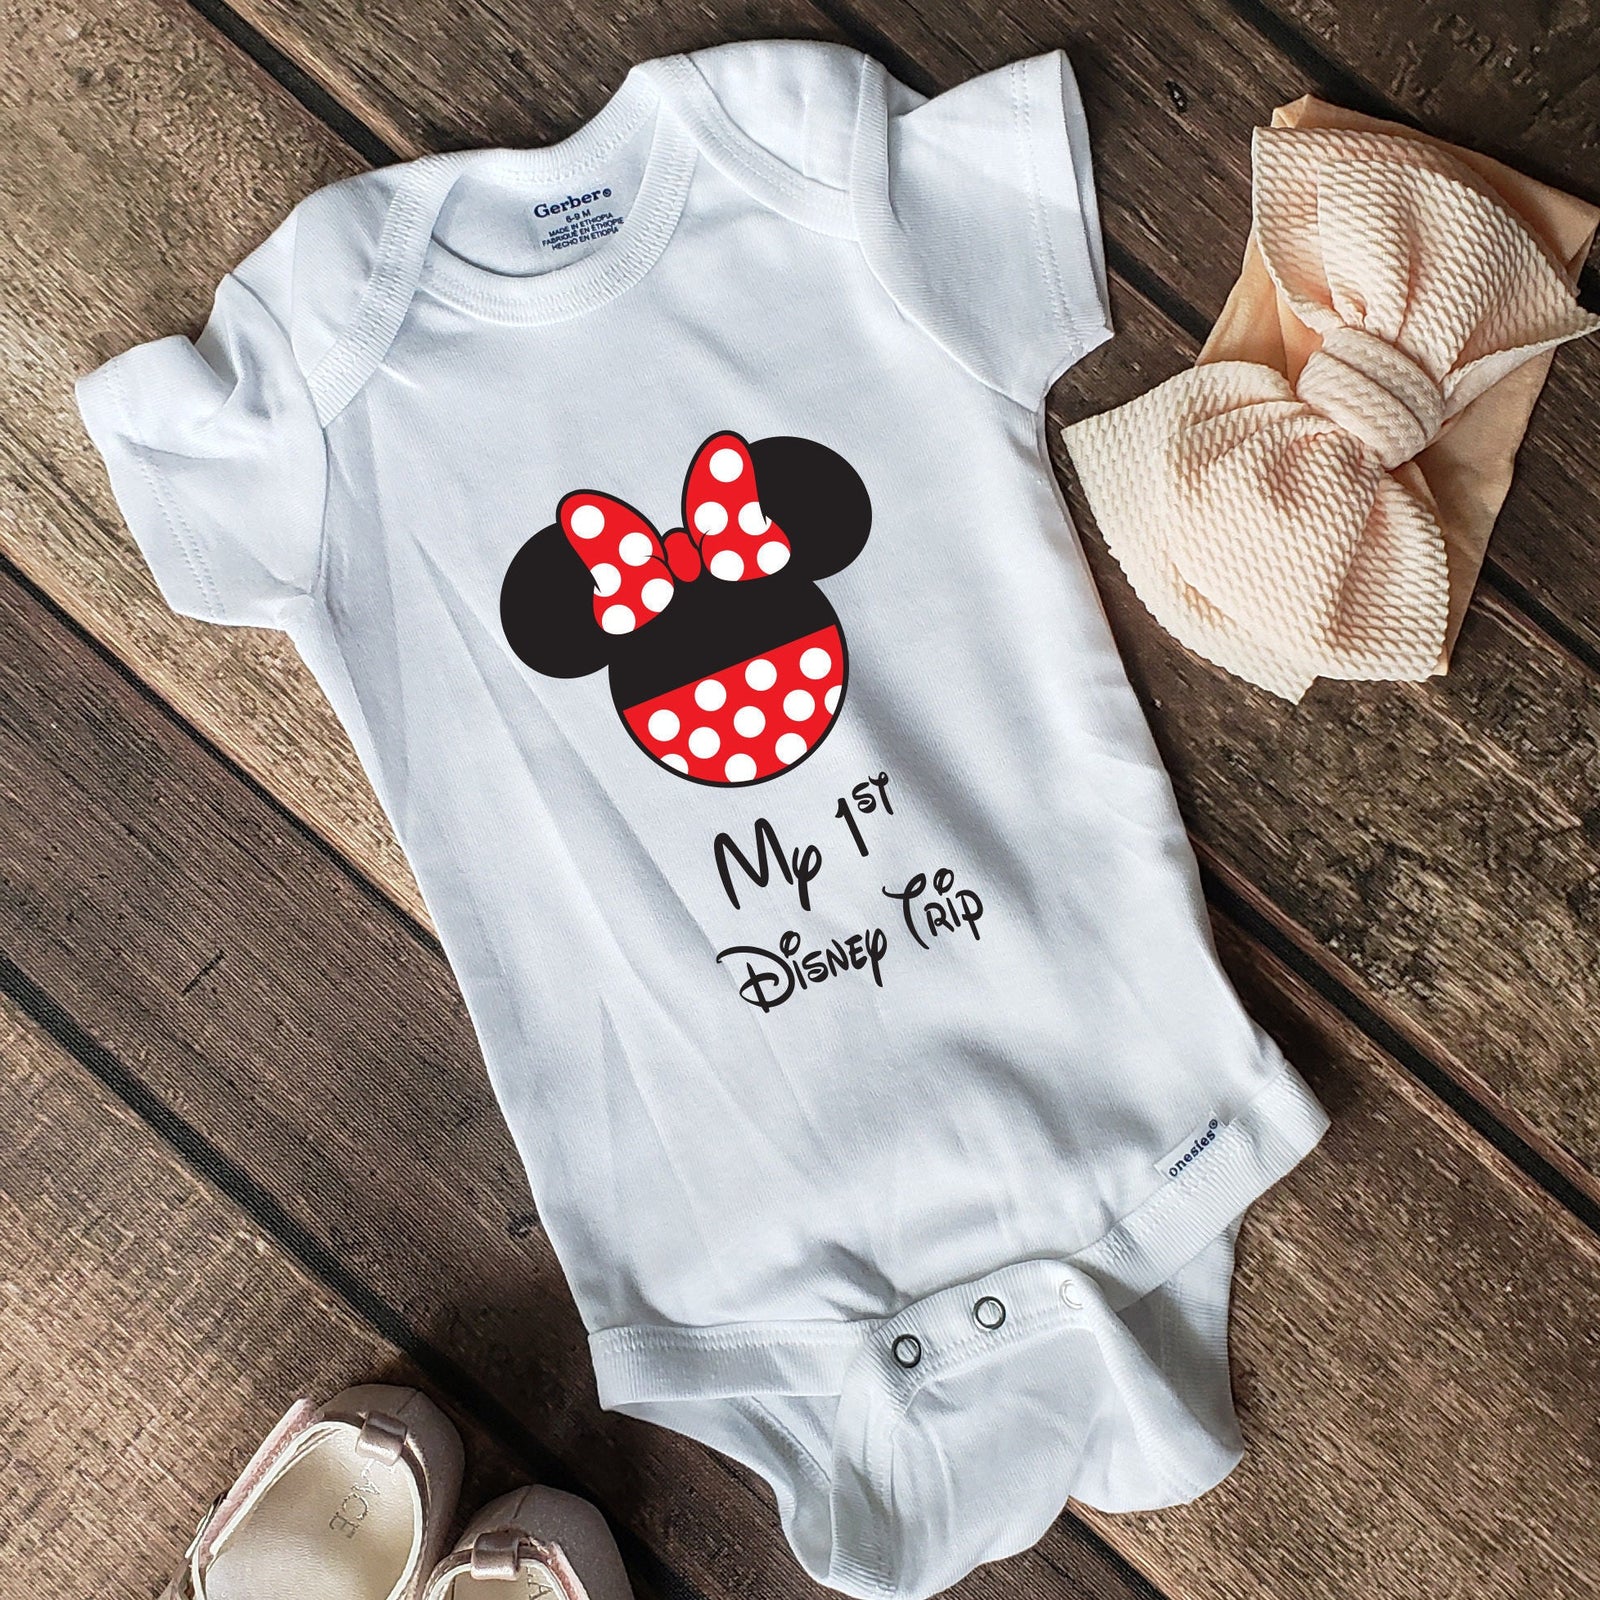 My First Disney Trip Shirt - Baby Minnie Mouse Pants -  Infant Onesie - 1st Time Visit